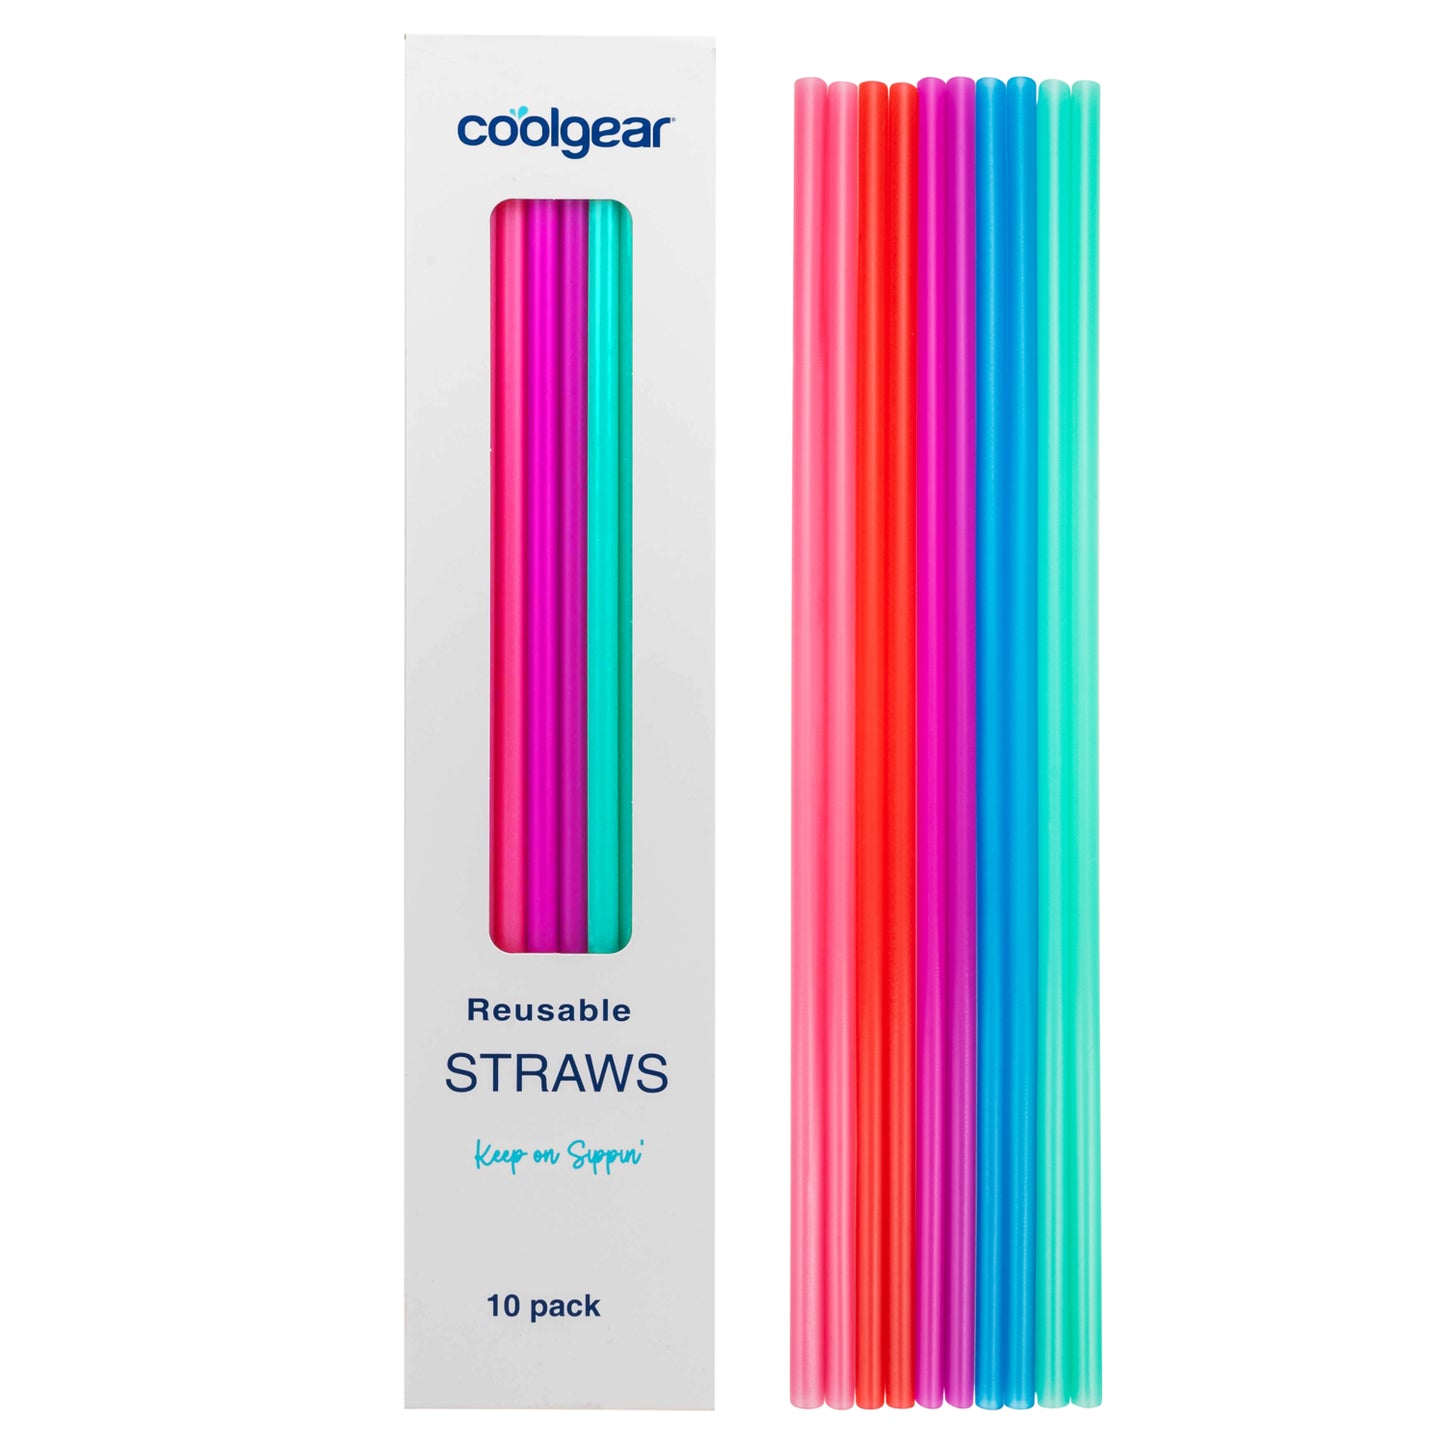 Cool Gear 10-Pack Reusable Drinking Straws | Eco-Friendly, Dishwasher Safe, Hard Plastic, Replacement Straws For Tumblers, Mason Jars, & Travel | Sturdy and Easy to Clean